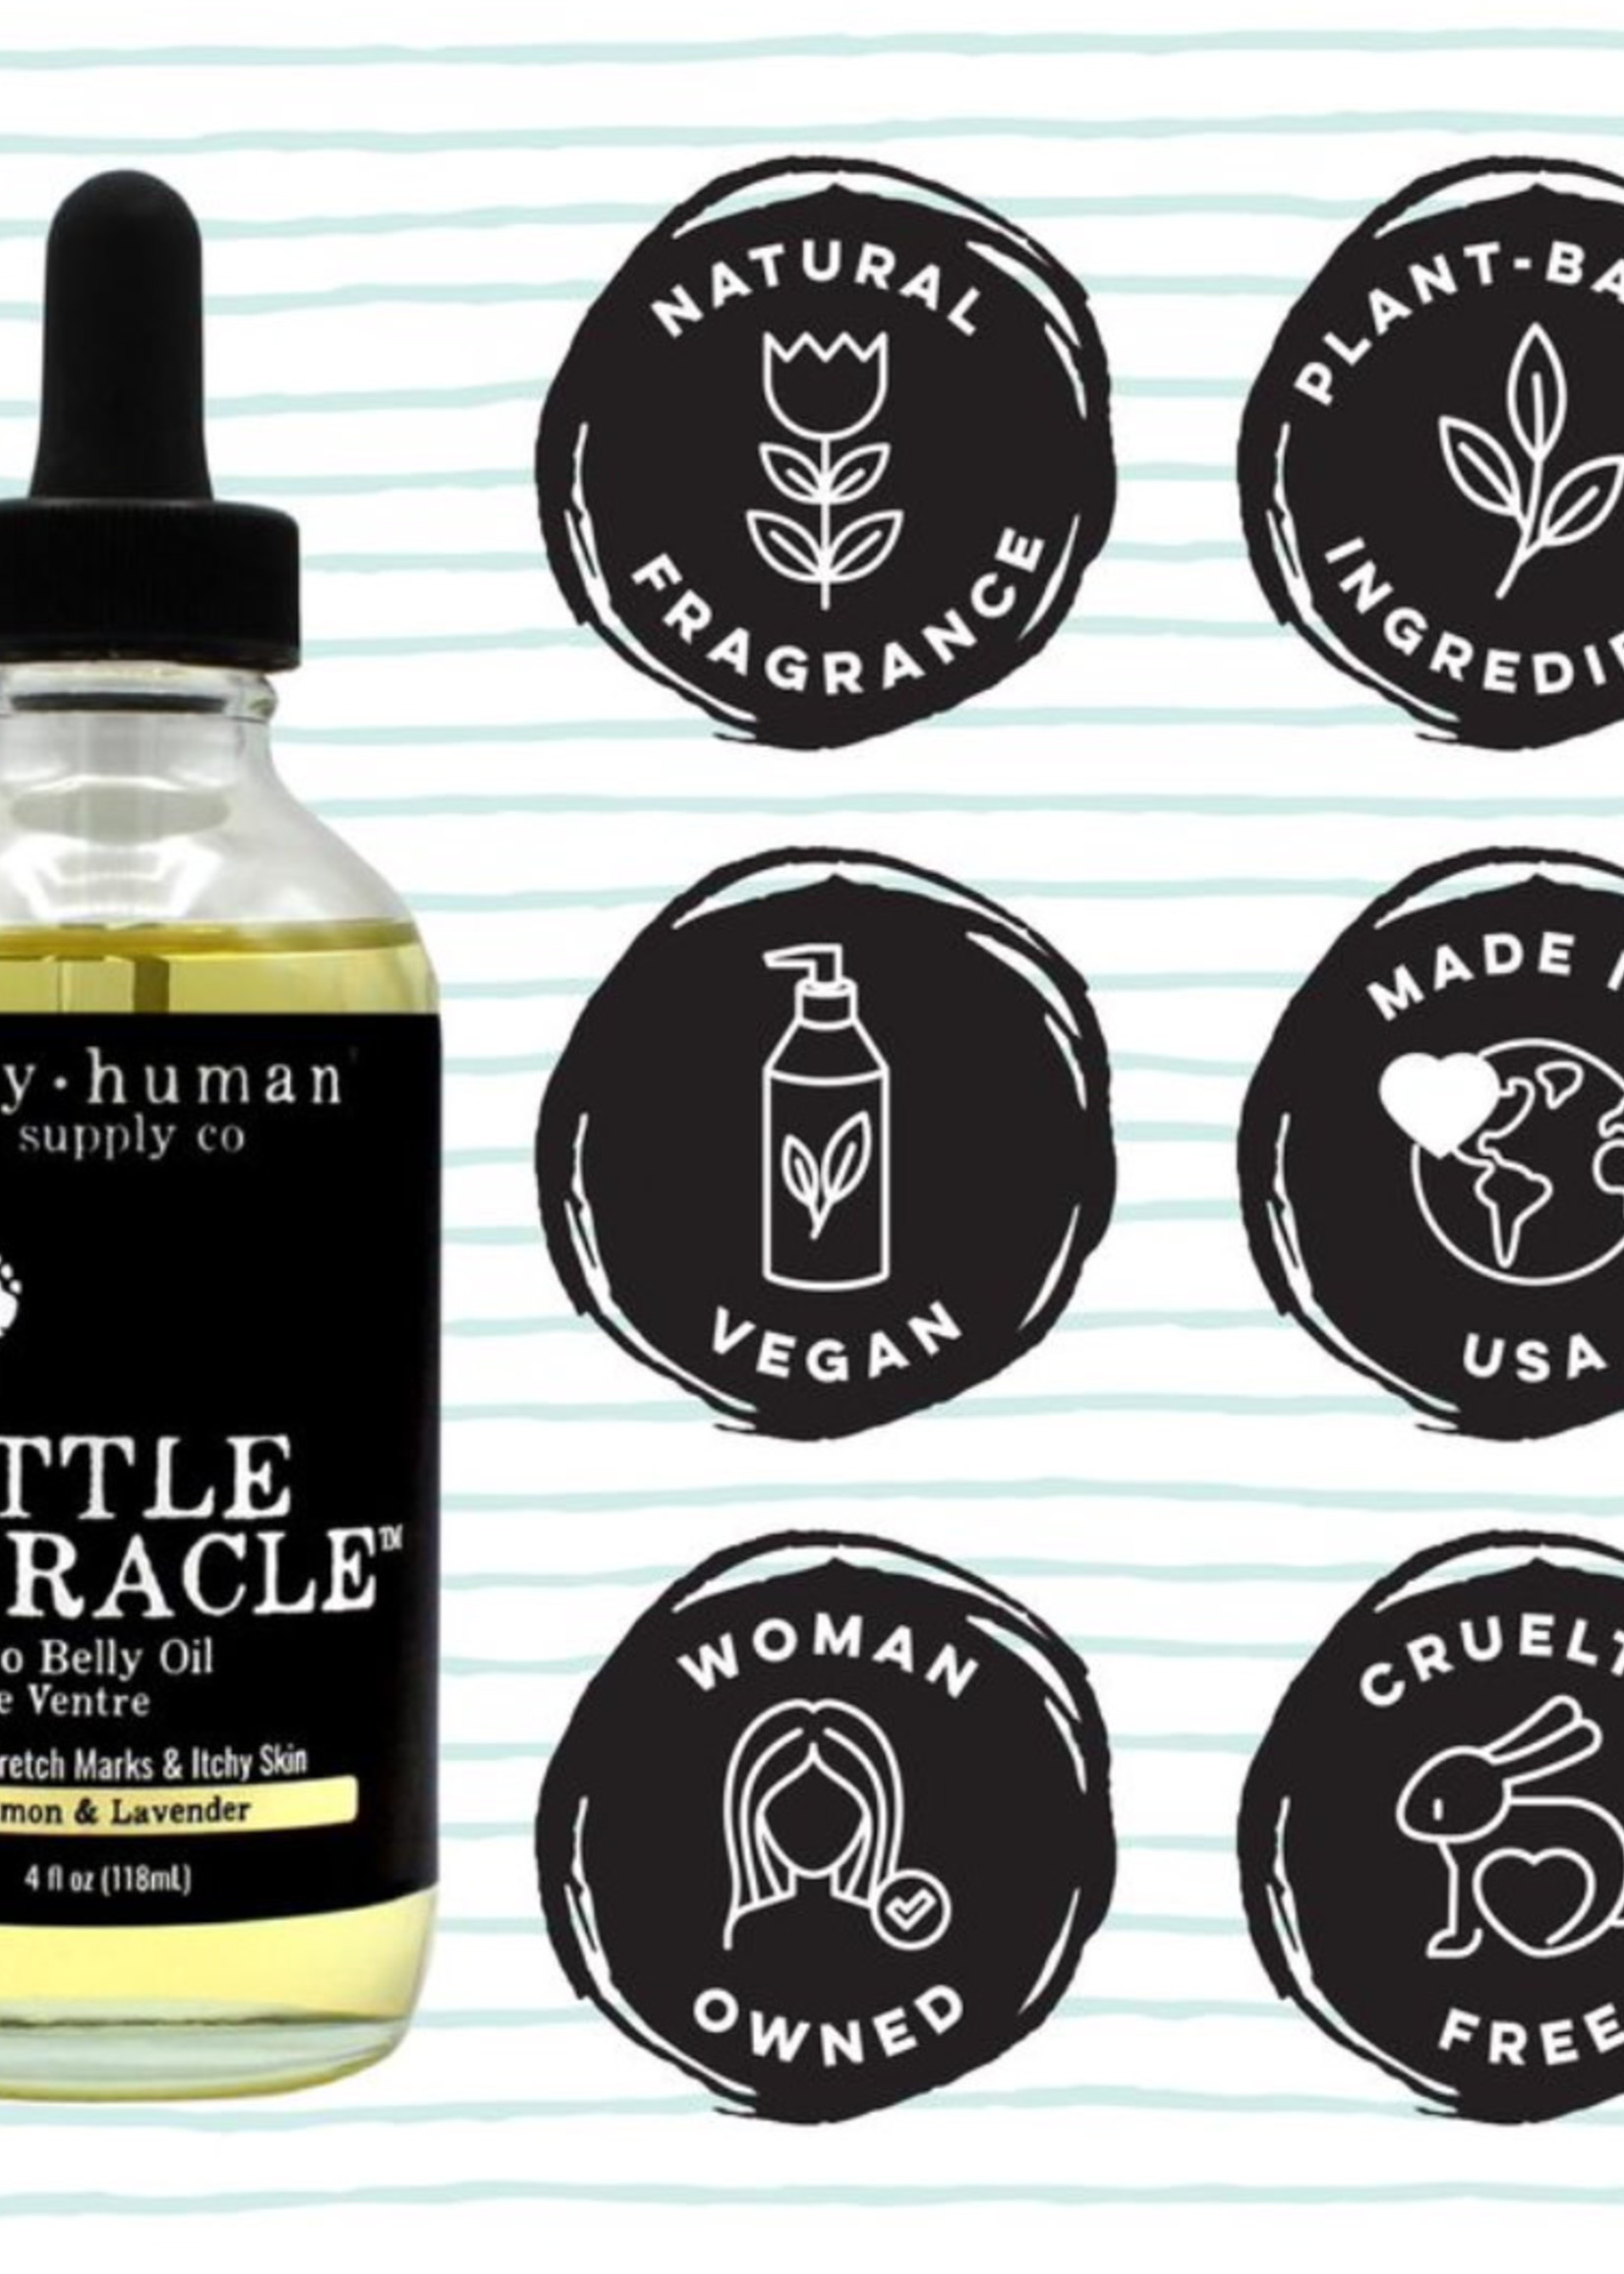 Tiny Human Supply Co Little Miracle Preggo Belly Oil